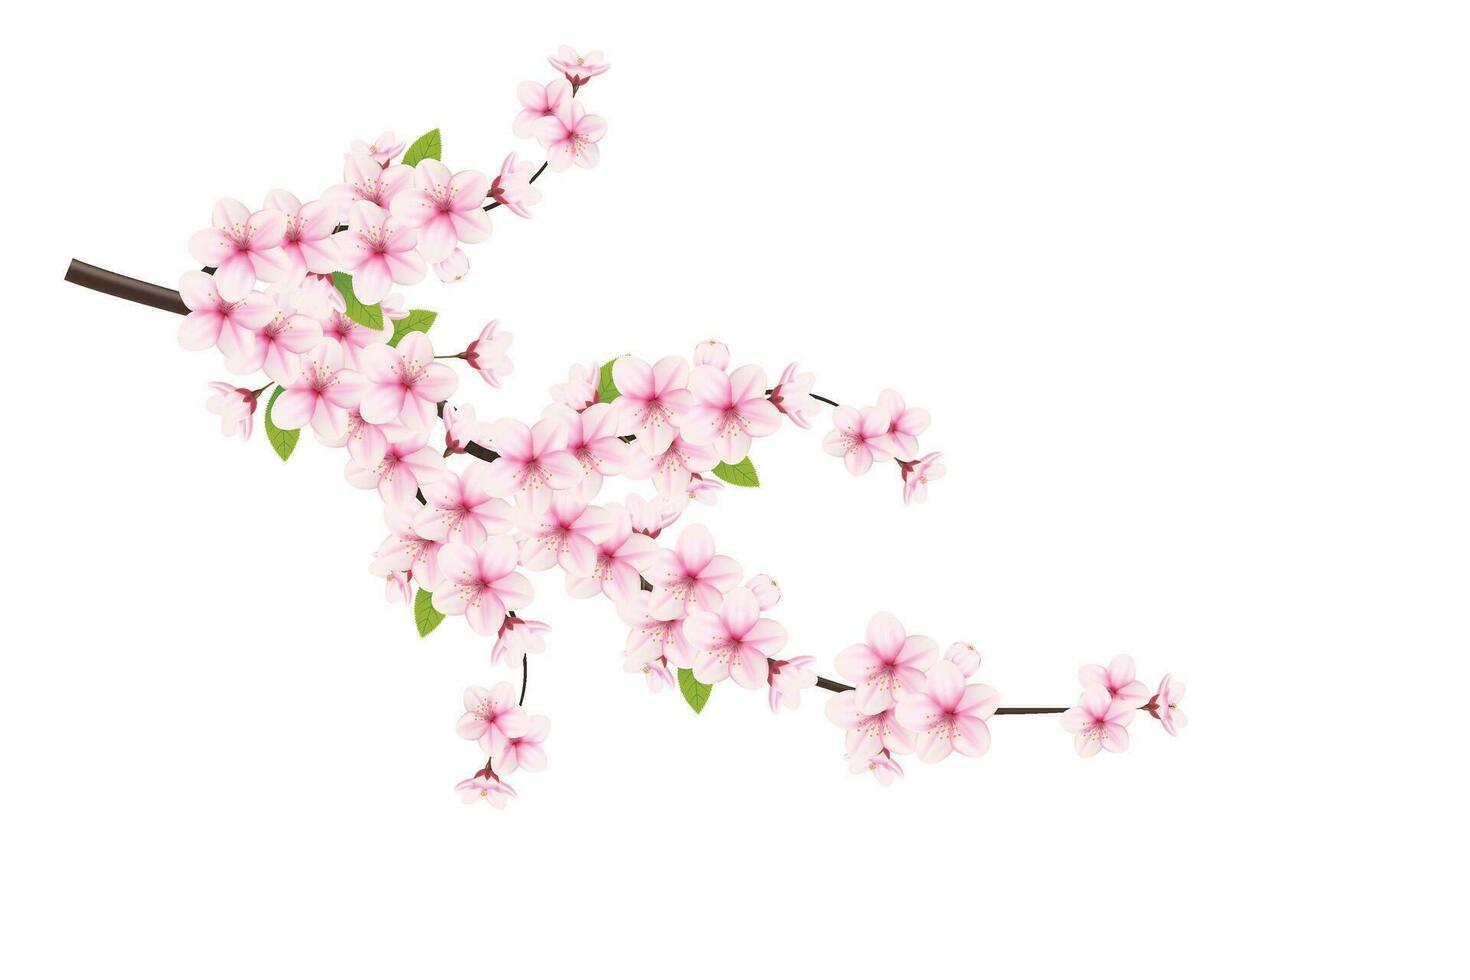 Realistic cherry blossom and  cherry flowers and petals illustration,cherry blossom vector. pink sakura flower background. cherry blossom flower blooming vector